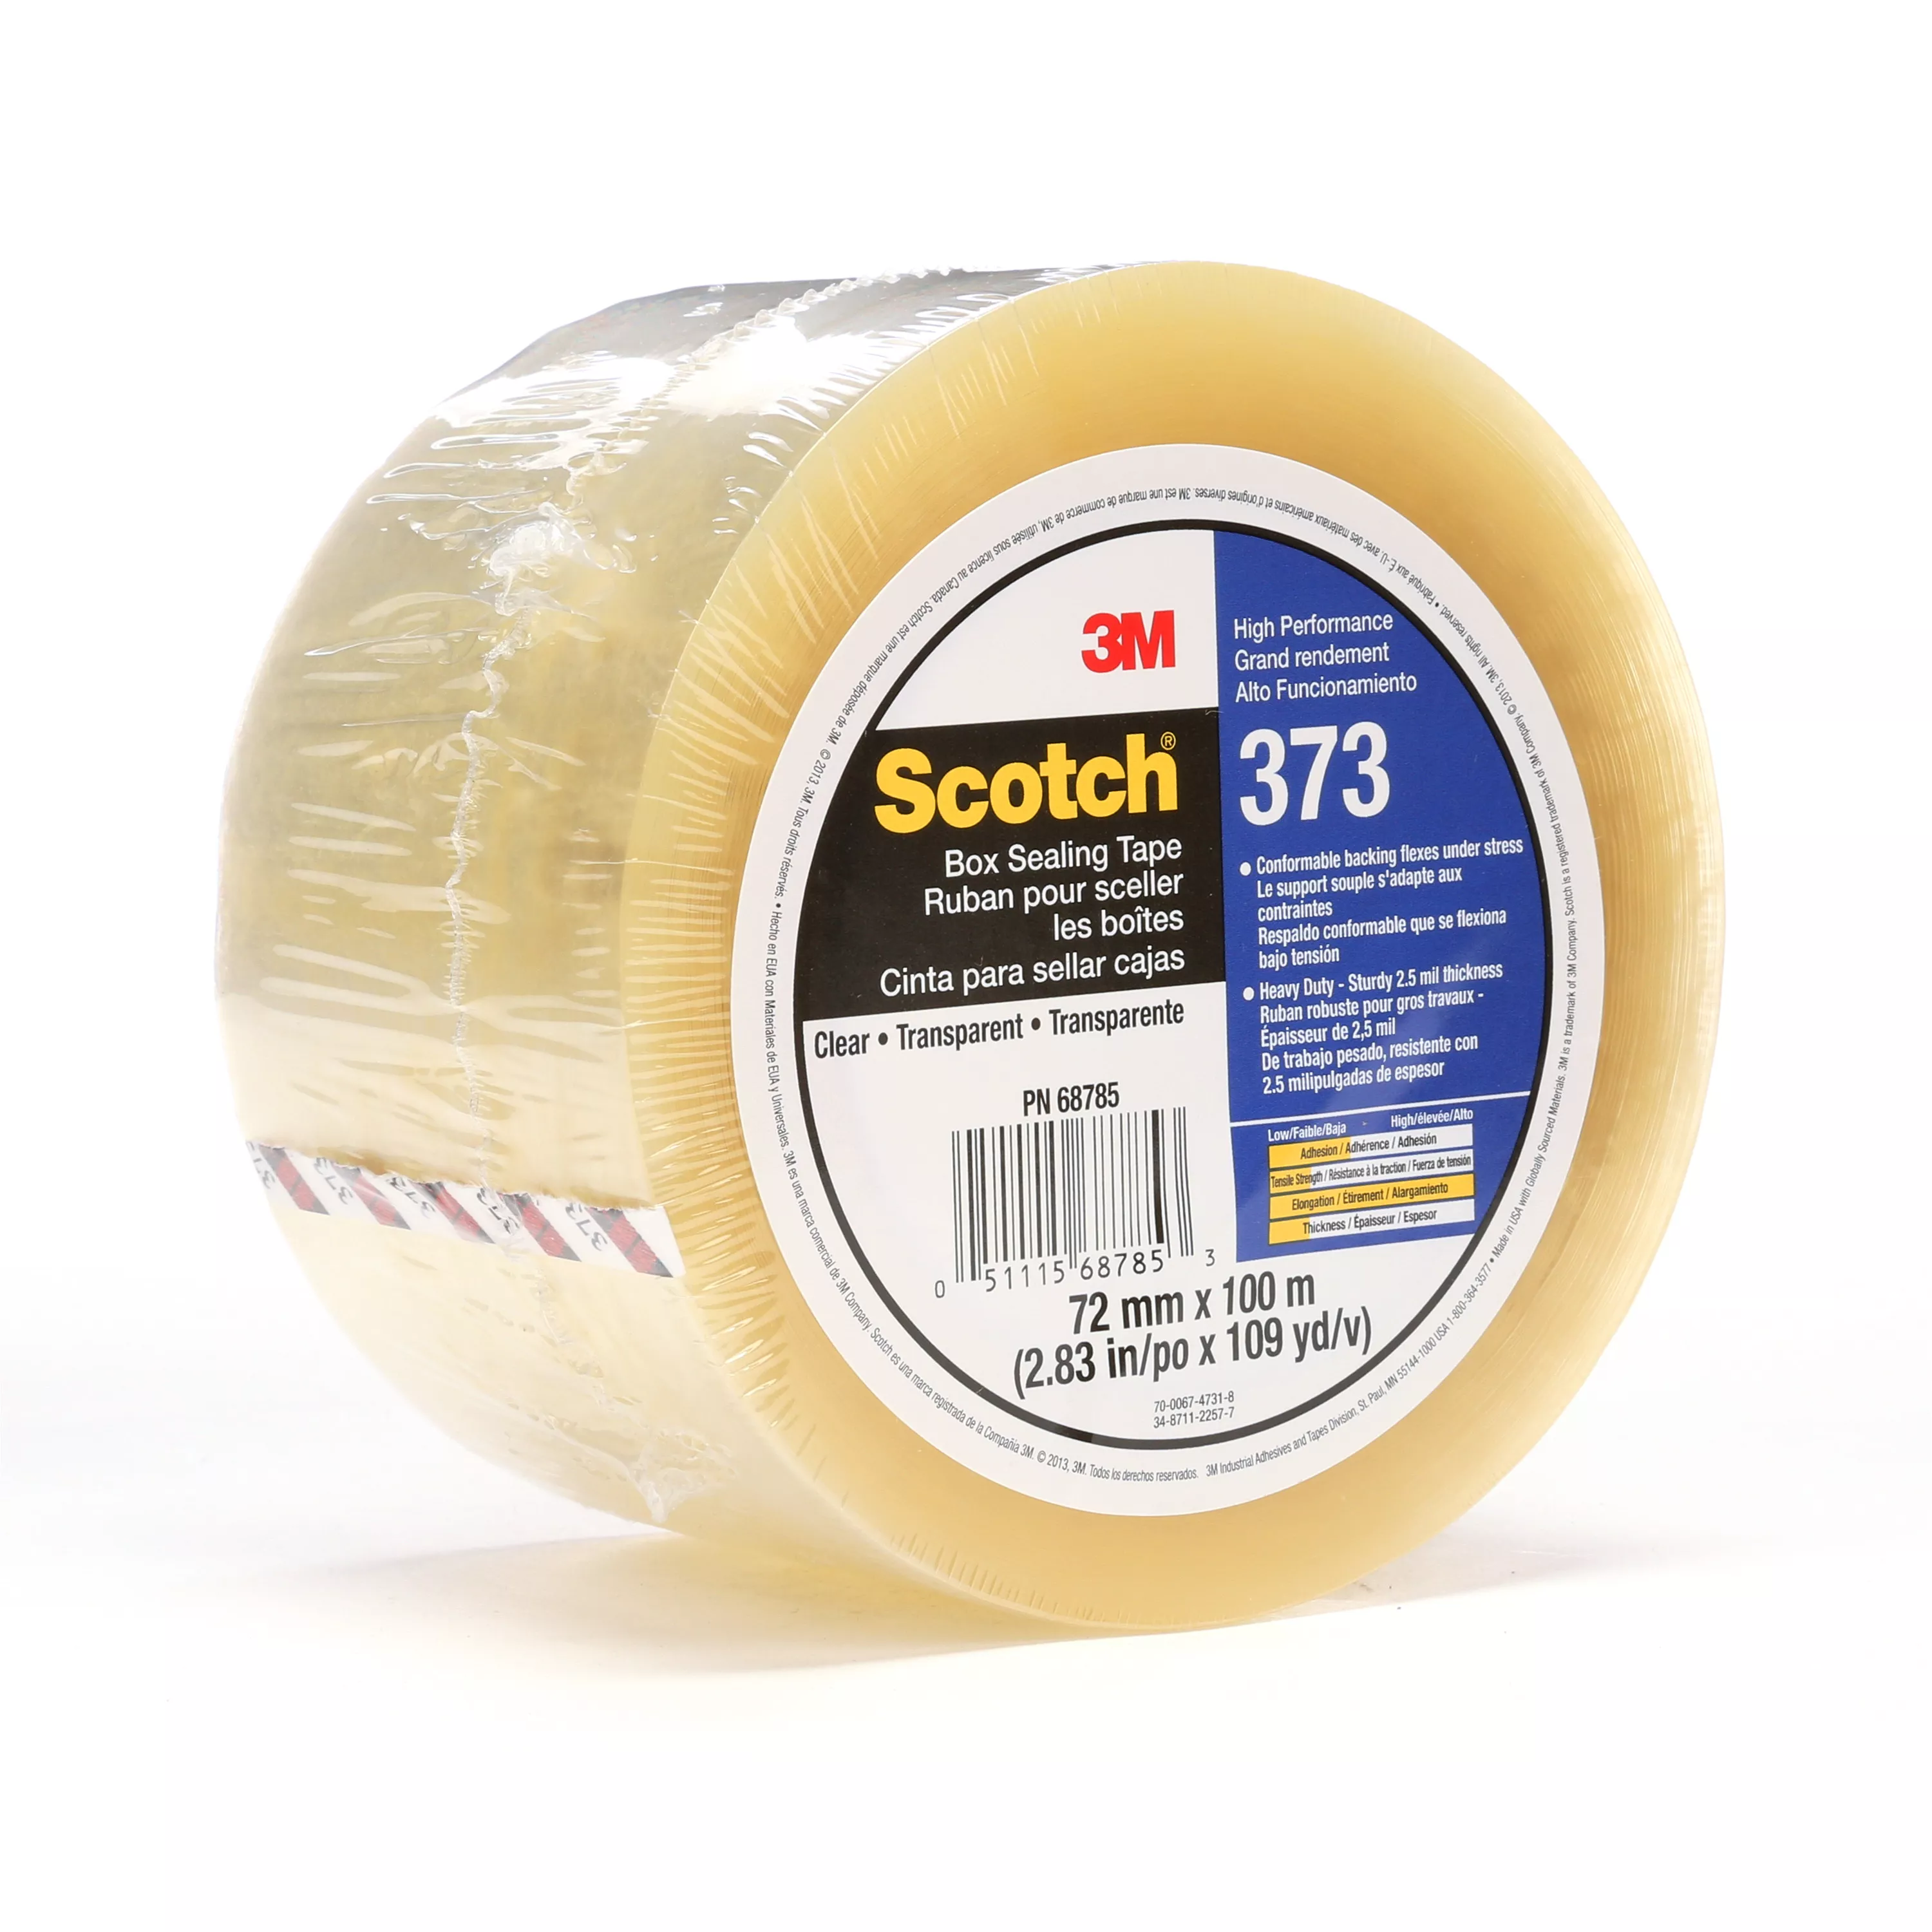 Scotch® Box Sealing Tape 373, Clear, 72 mm x 100 m, 24/Case,
Individually Wrapped Conveniently Packaged